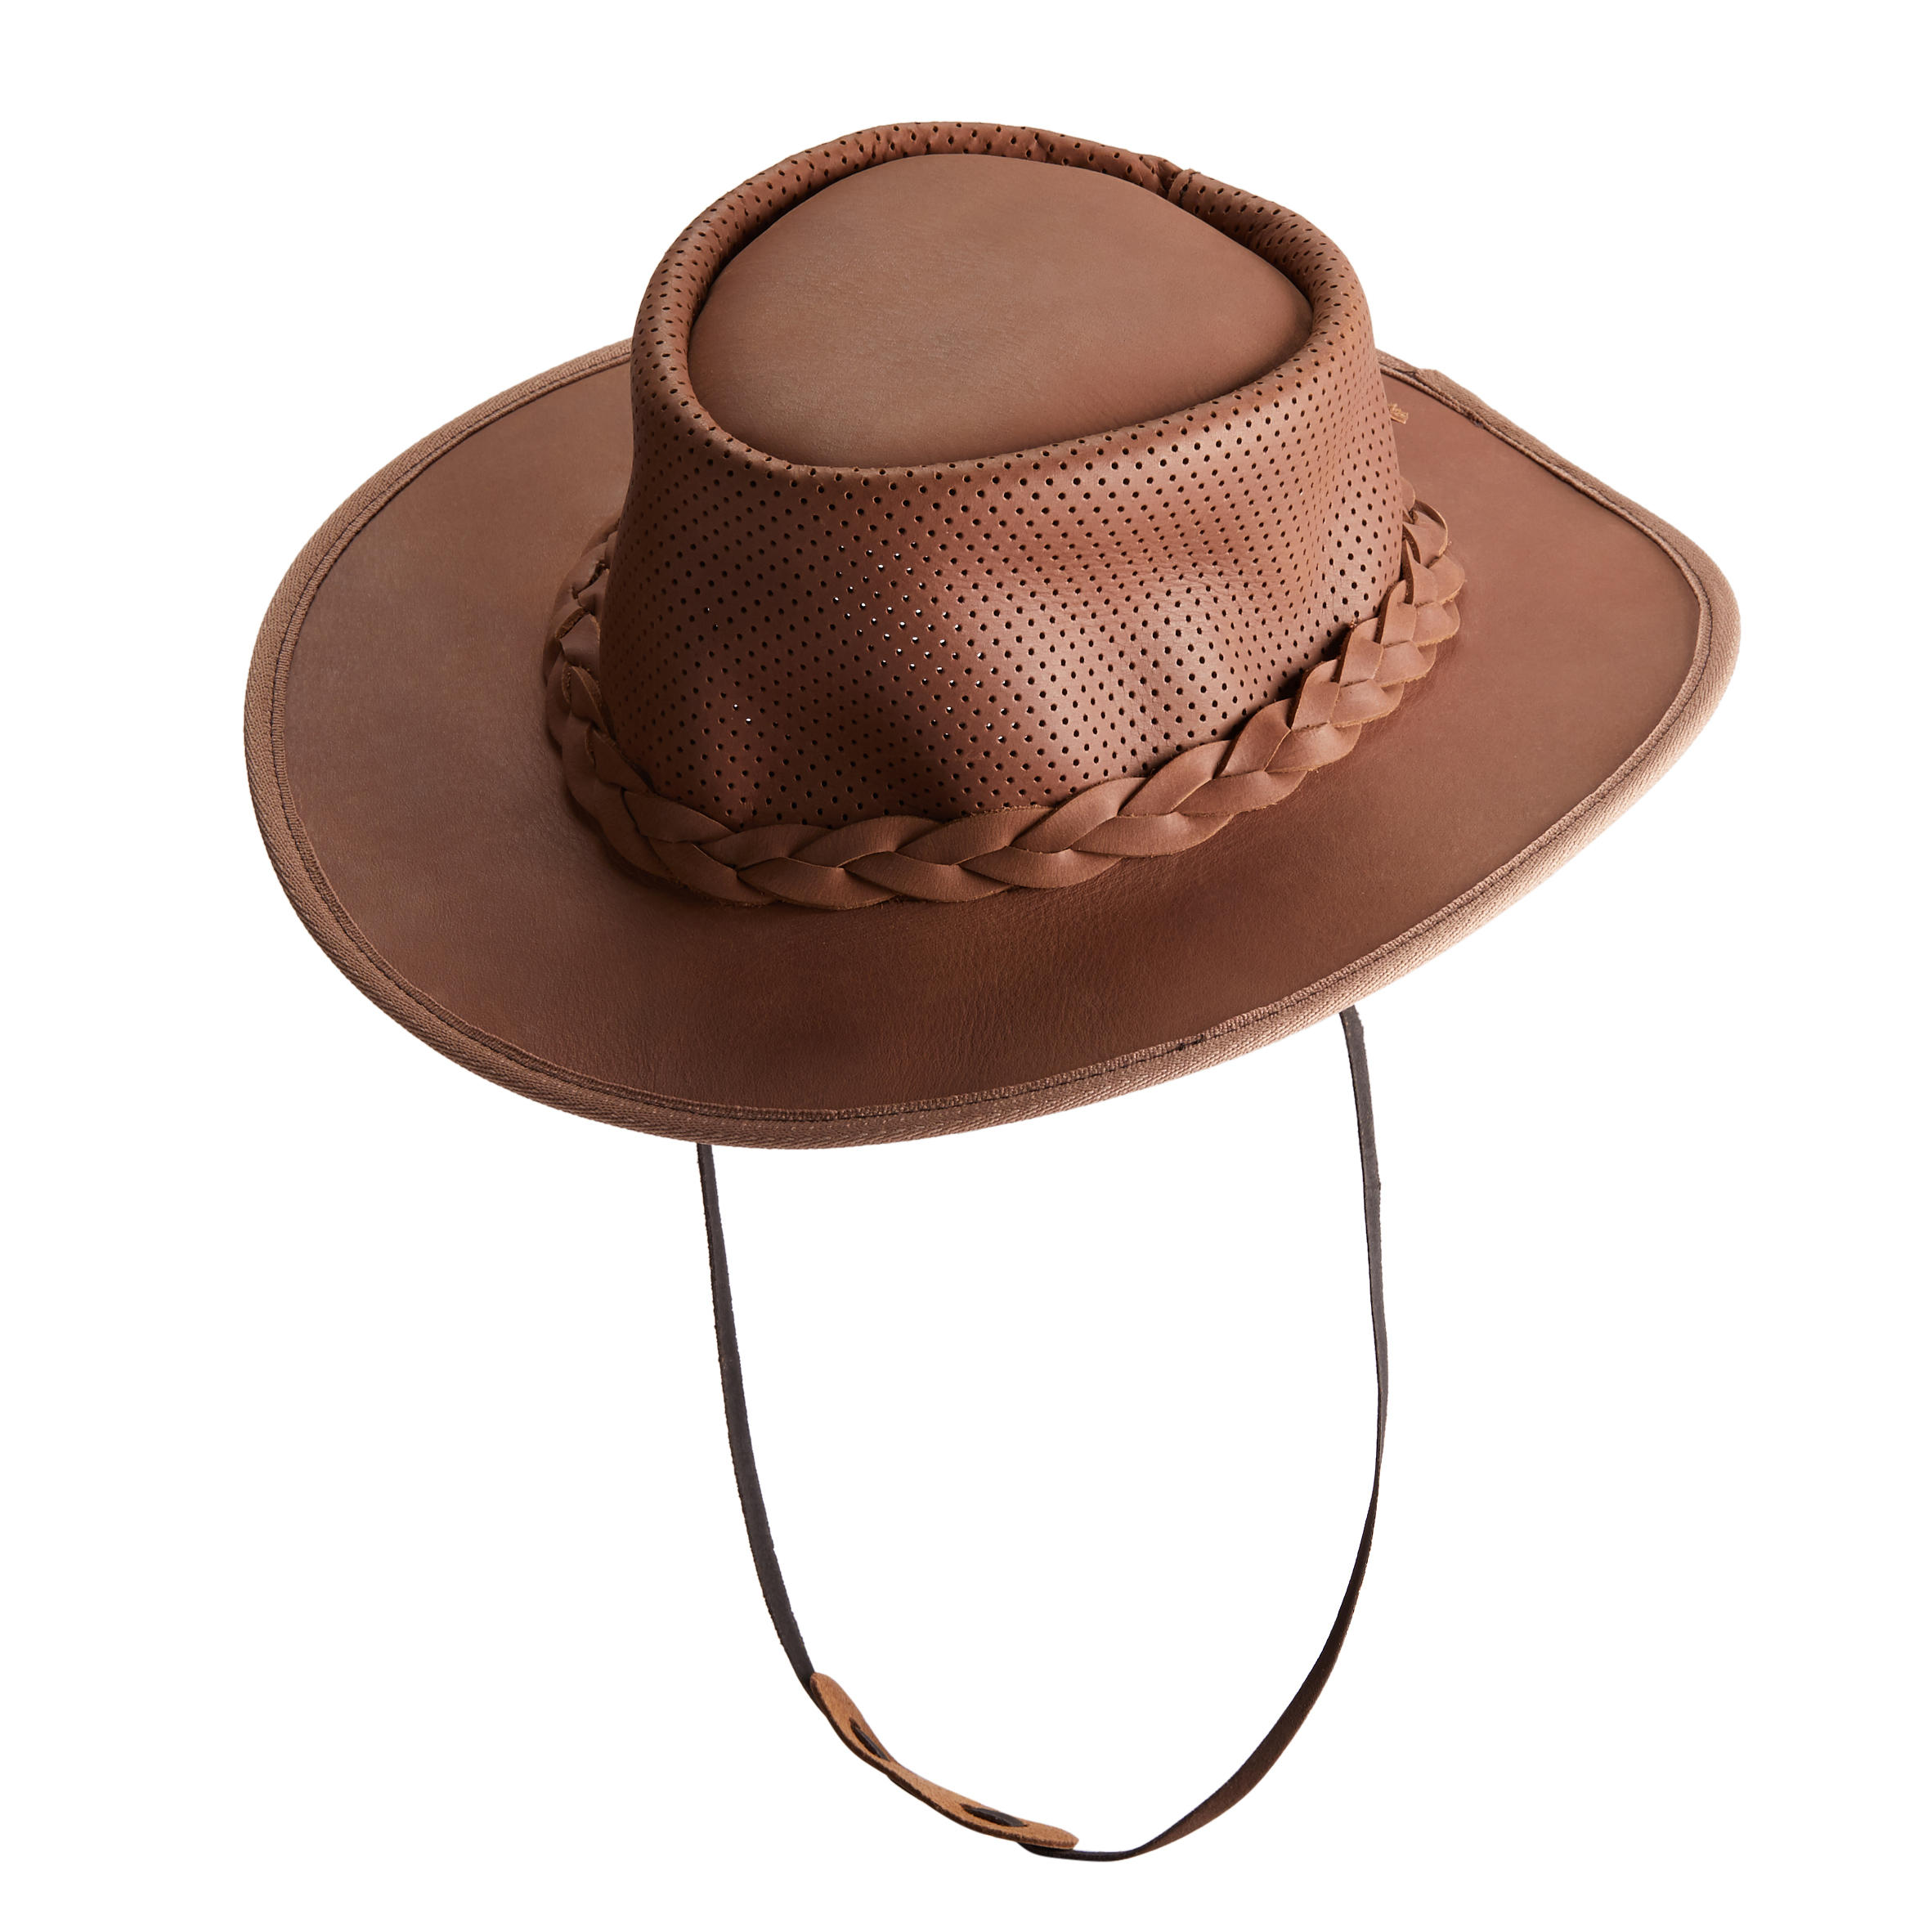 Crossover Adult Horse Riding Hat - Brown 1/8